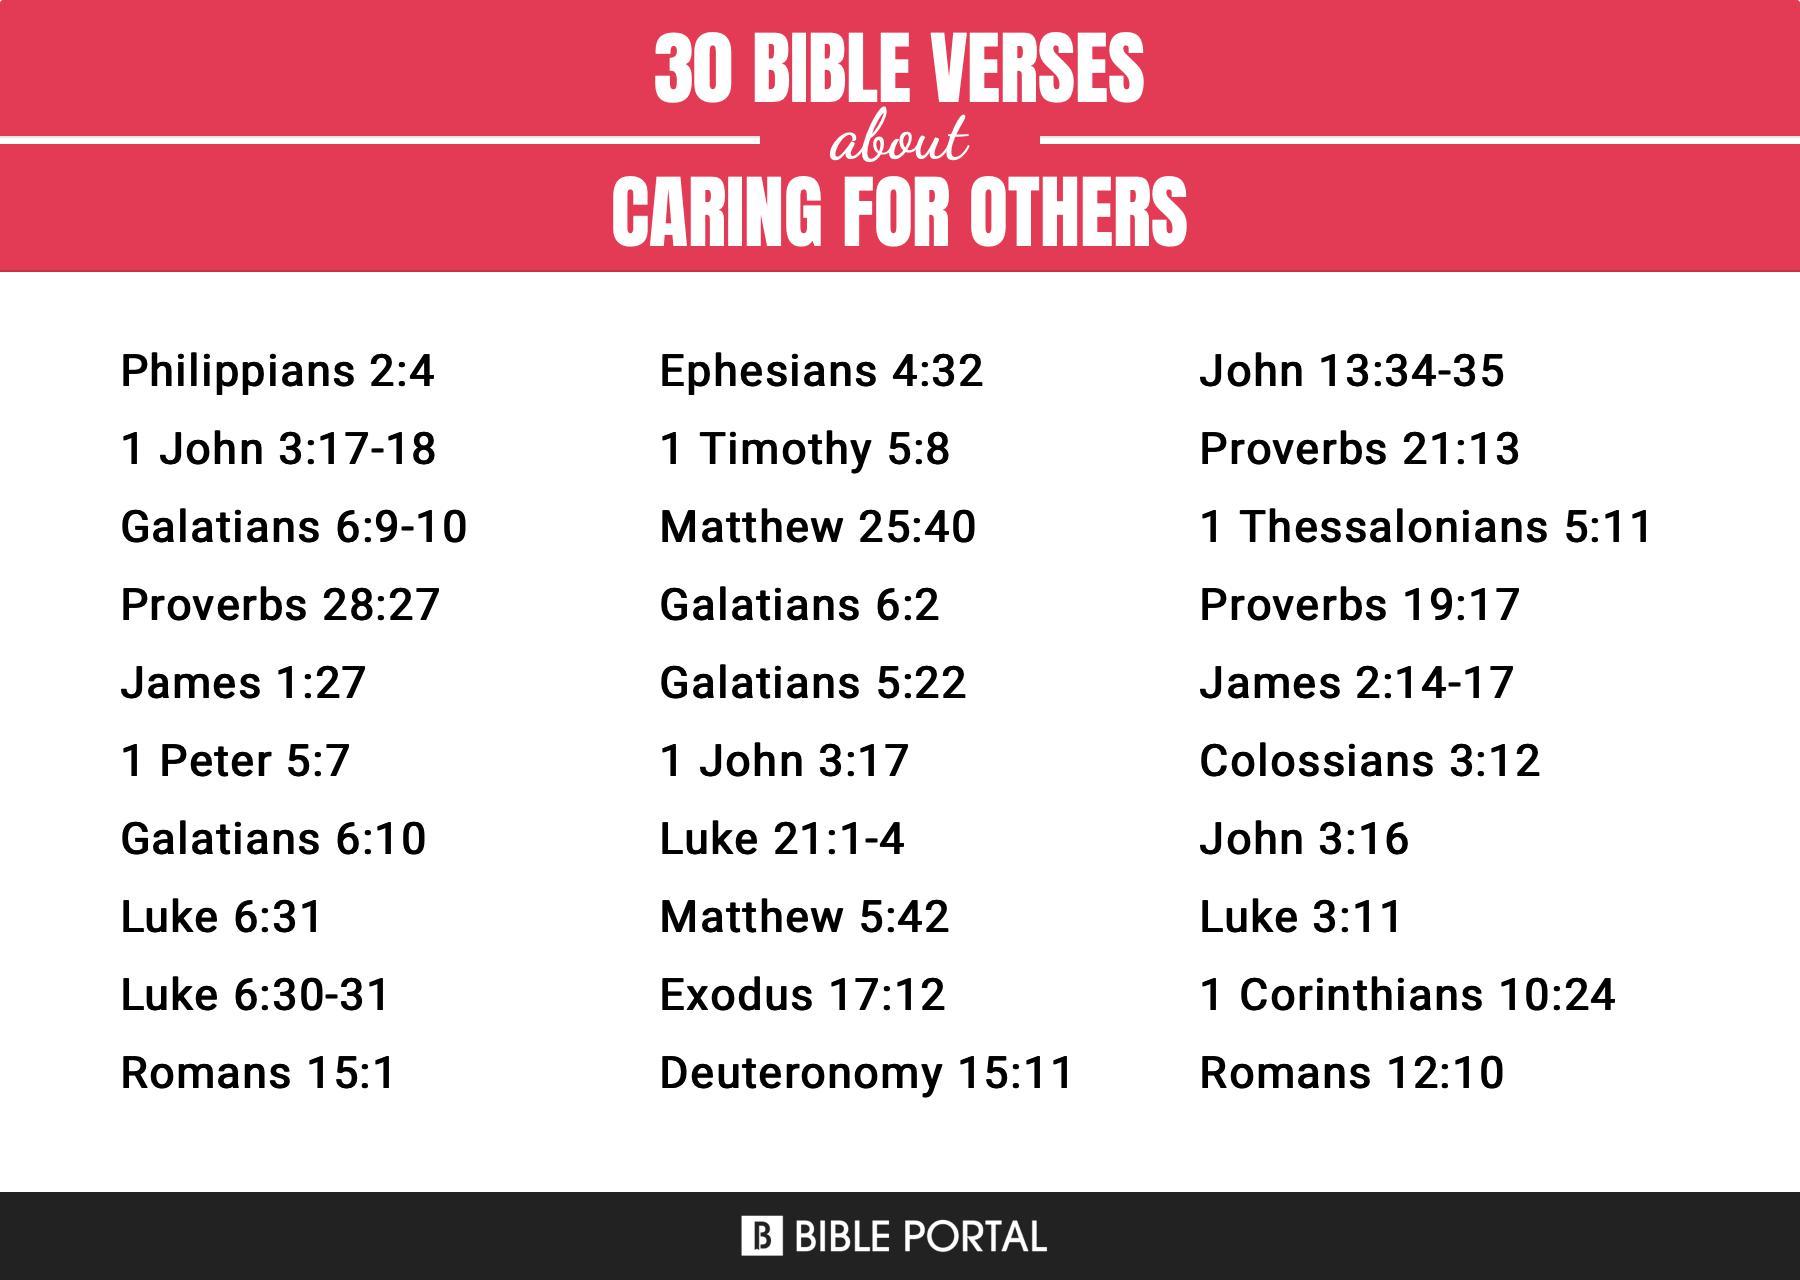 What Does the Bible Say about Caring For Others?